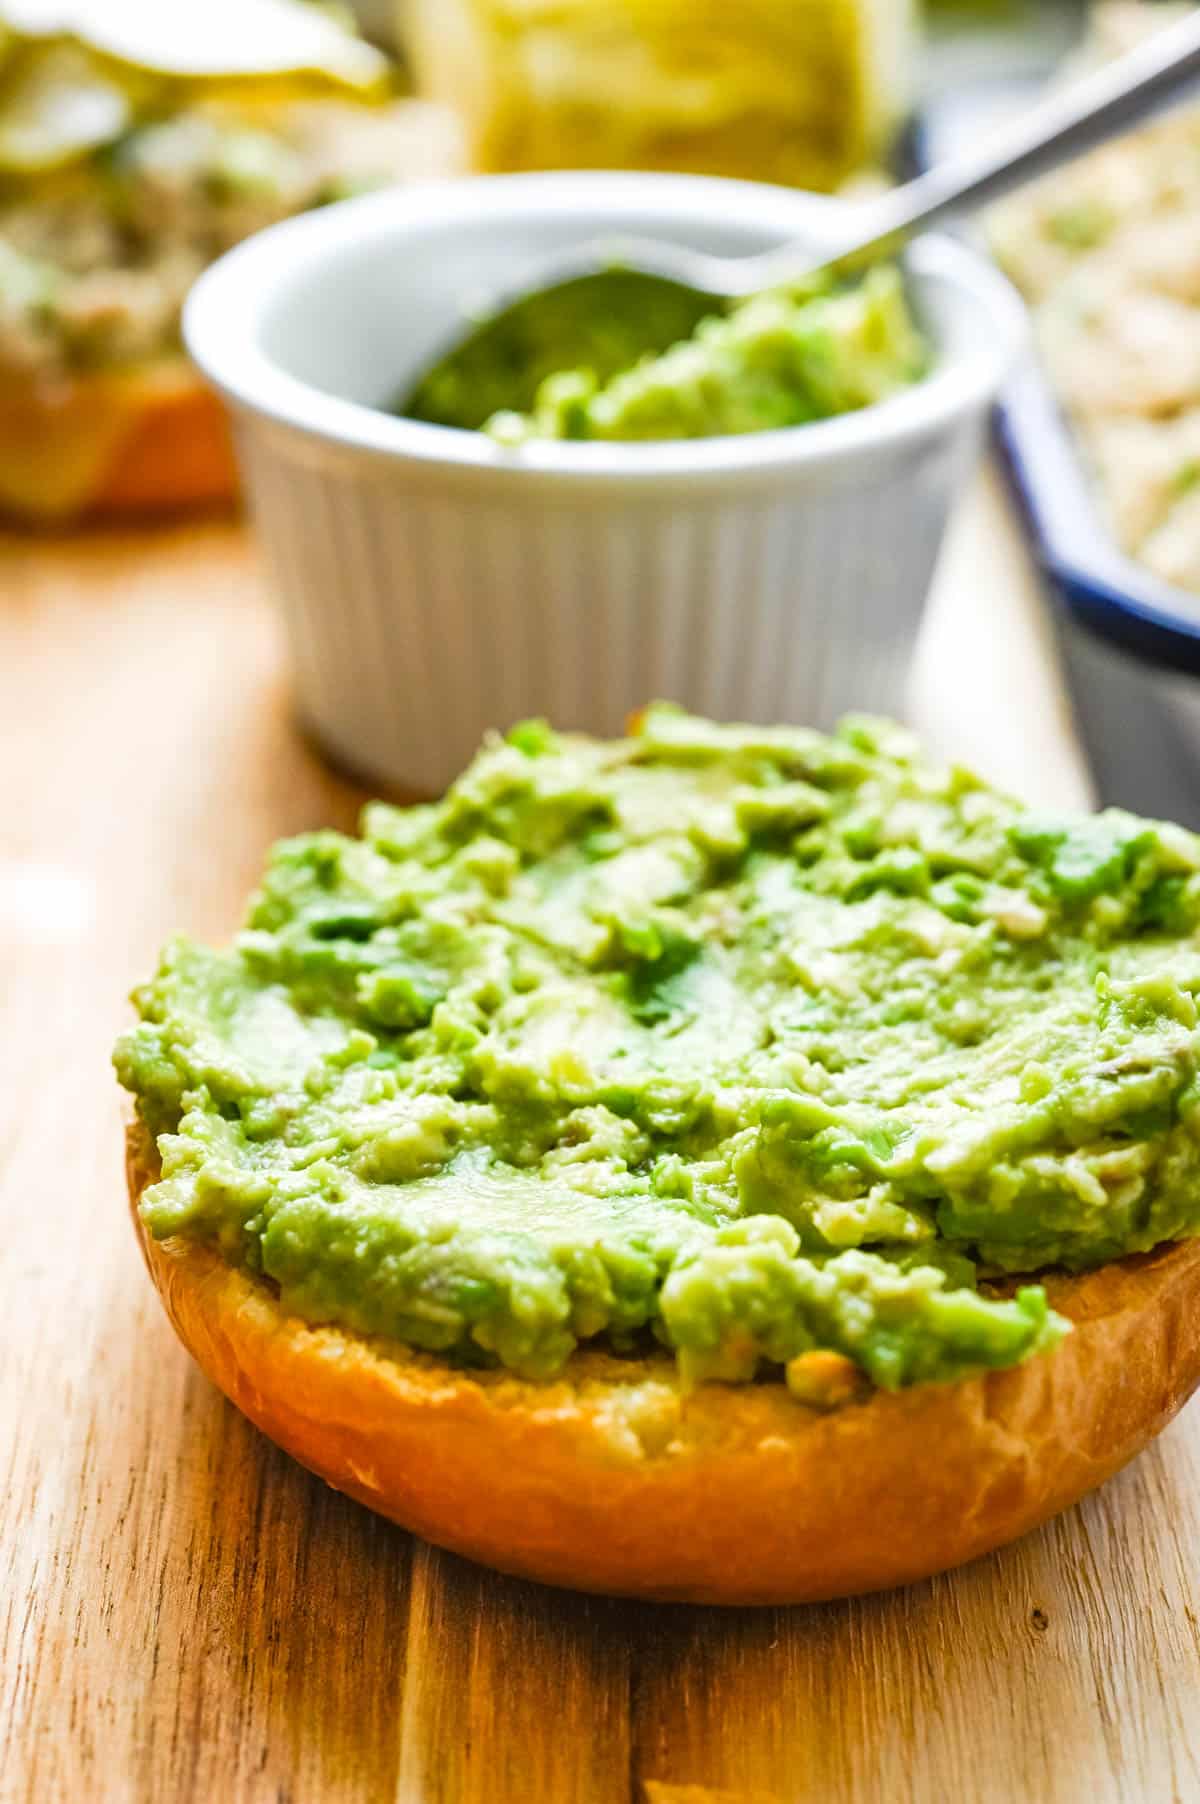 Spread the top bun with mashed avocado.